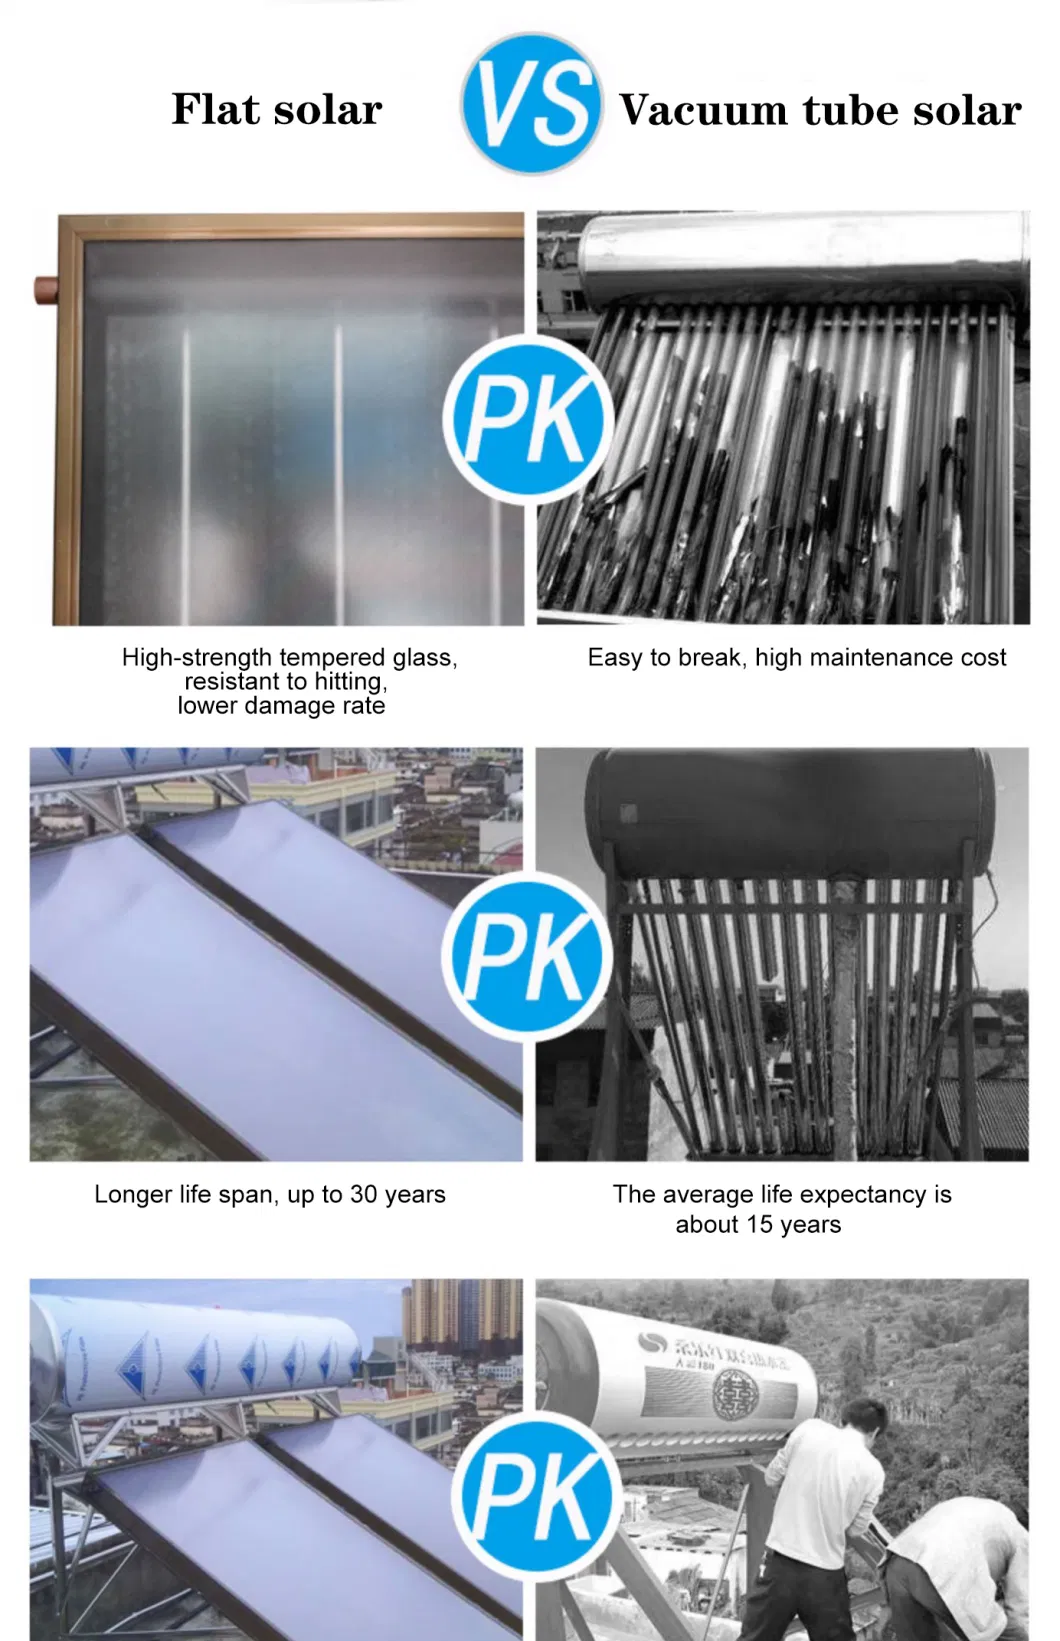 Solar Water Heater Residential Electric Water Heaters Home Portable Products, Inner Tank Hot Bath Solar Energy Geyser Indoor Water Heater